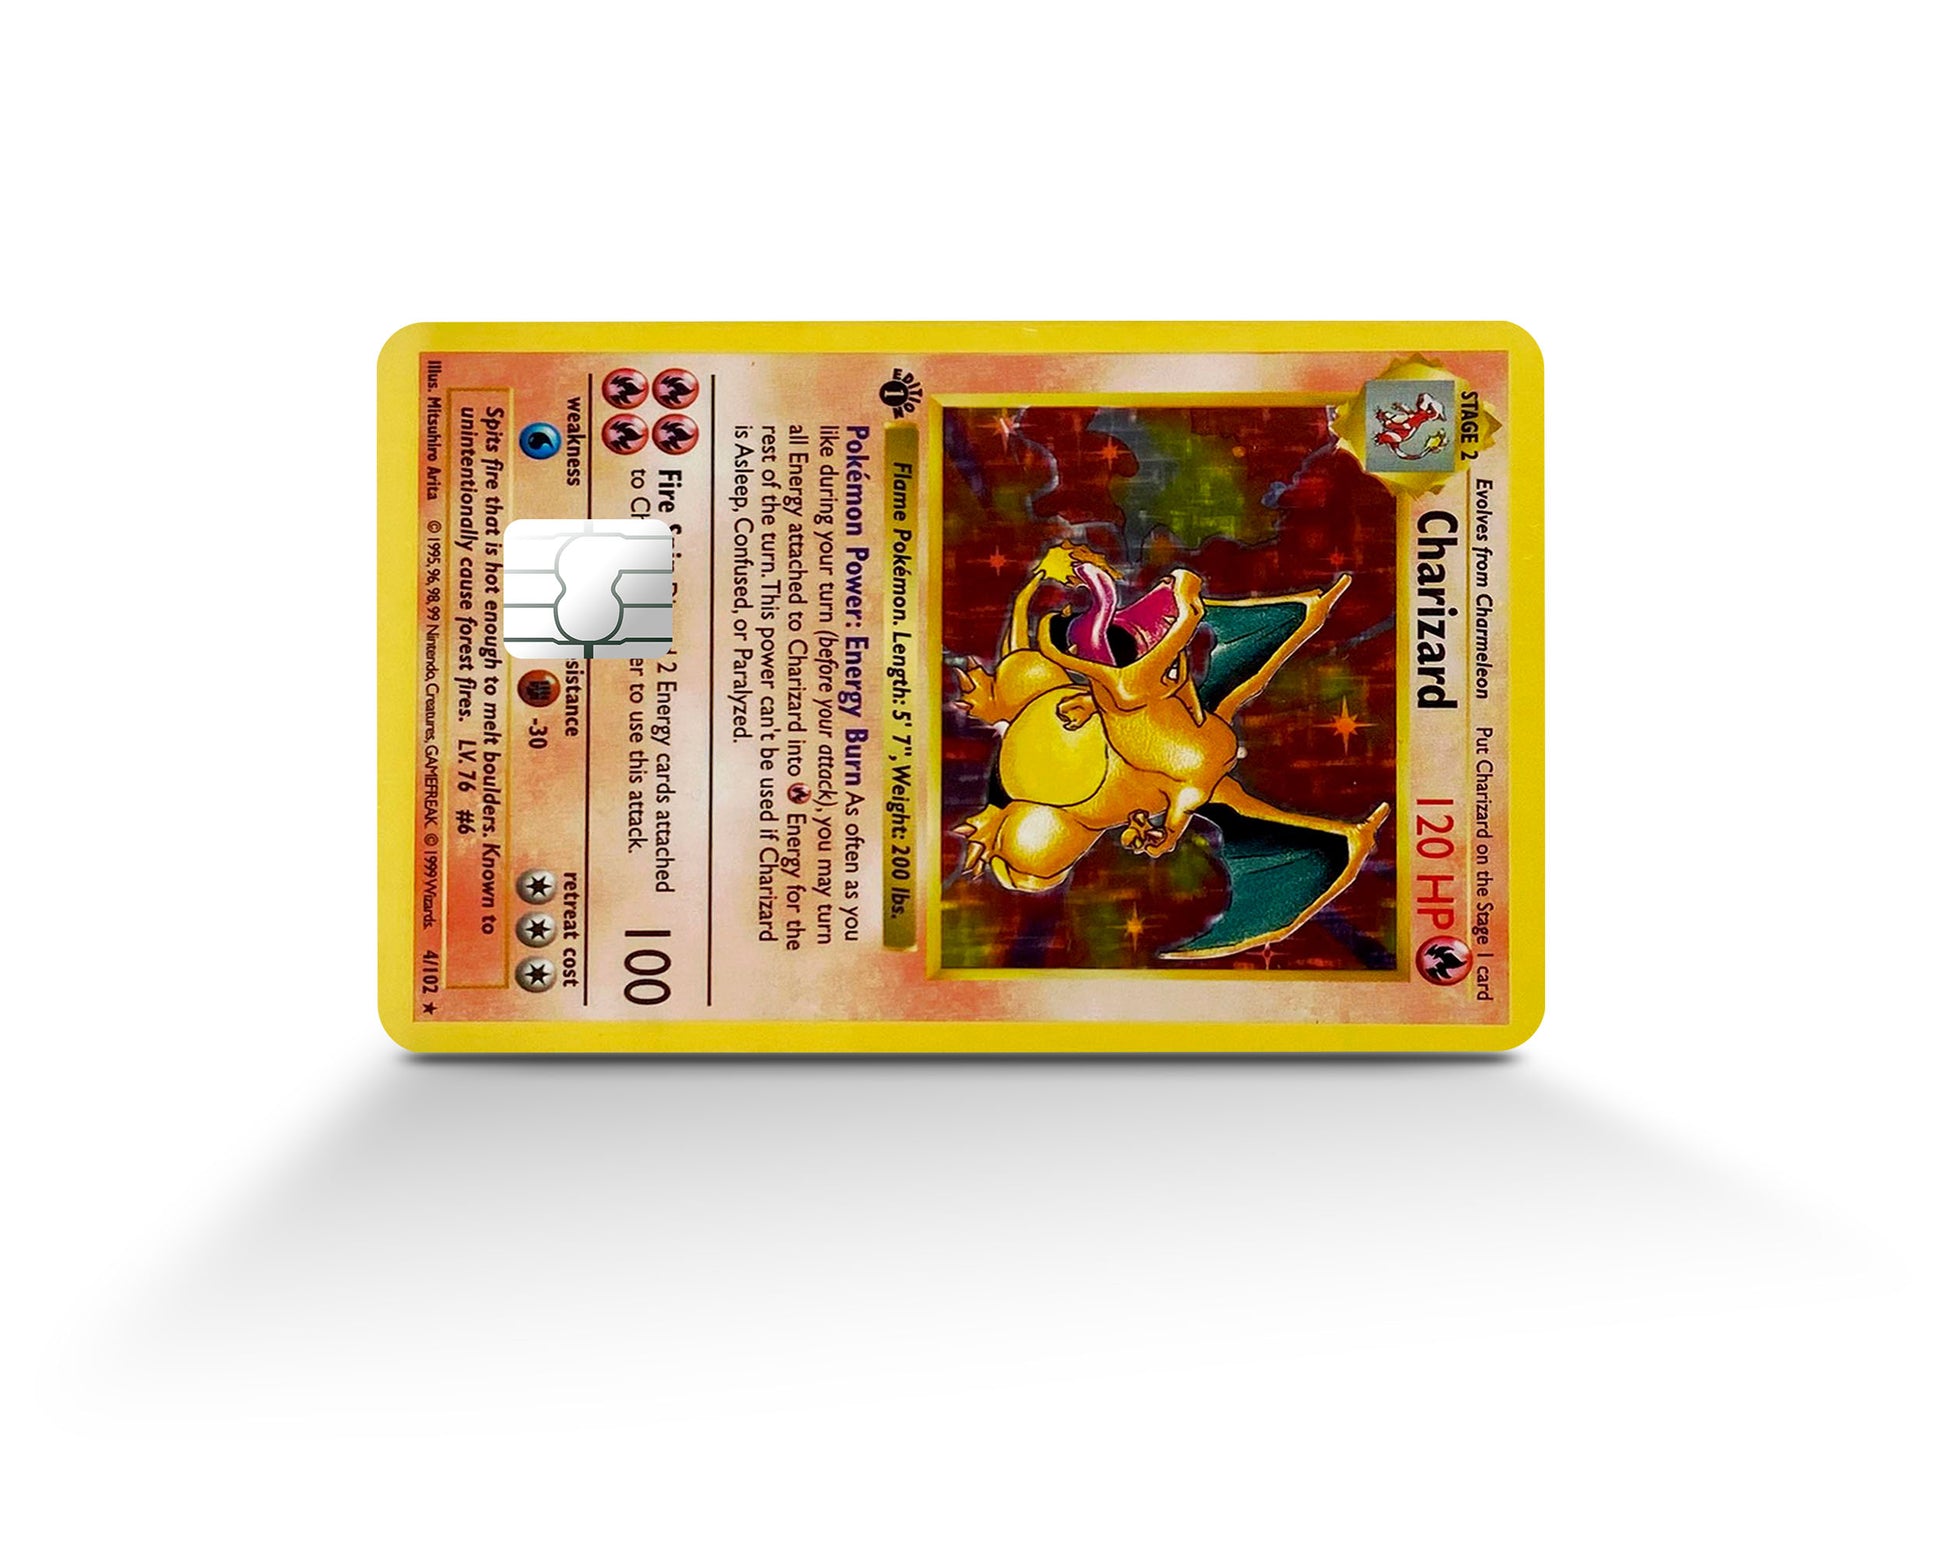 Check out my new credit card skin! : r/pokemoncards